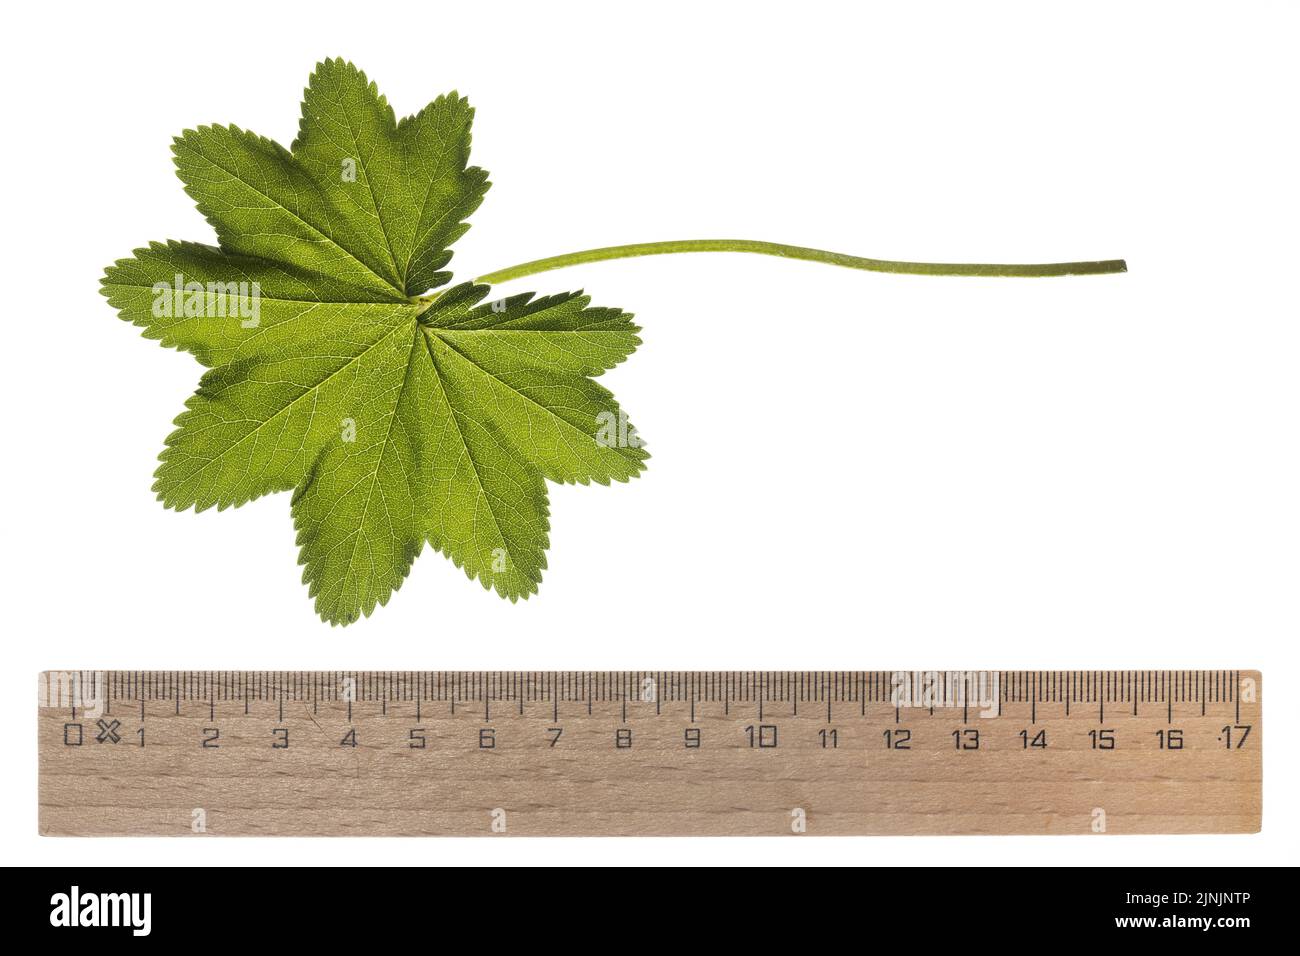 common lady's-mantle (Alchemilla vulgaris agg.), leaf with ruler, cut-out Stock Photo